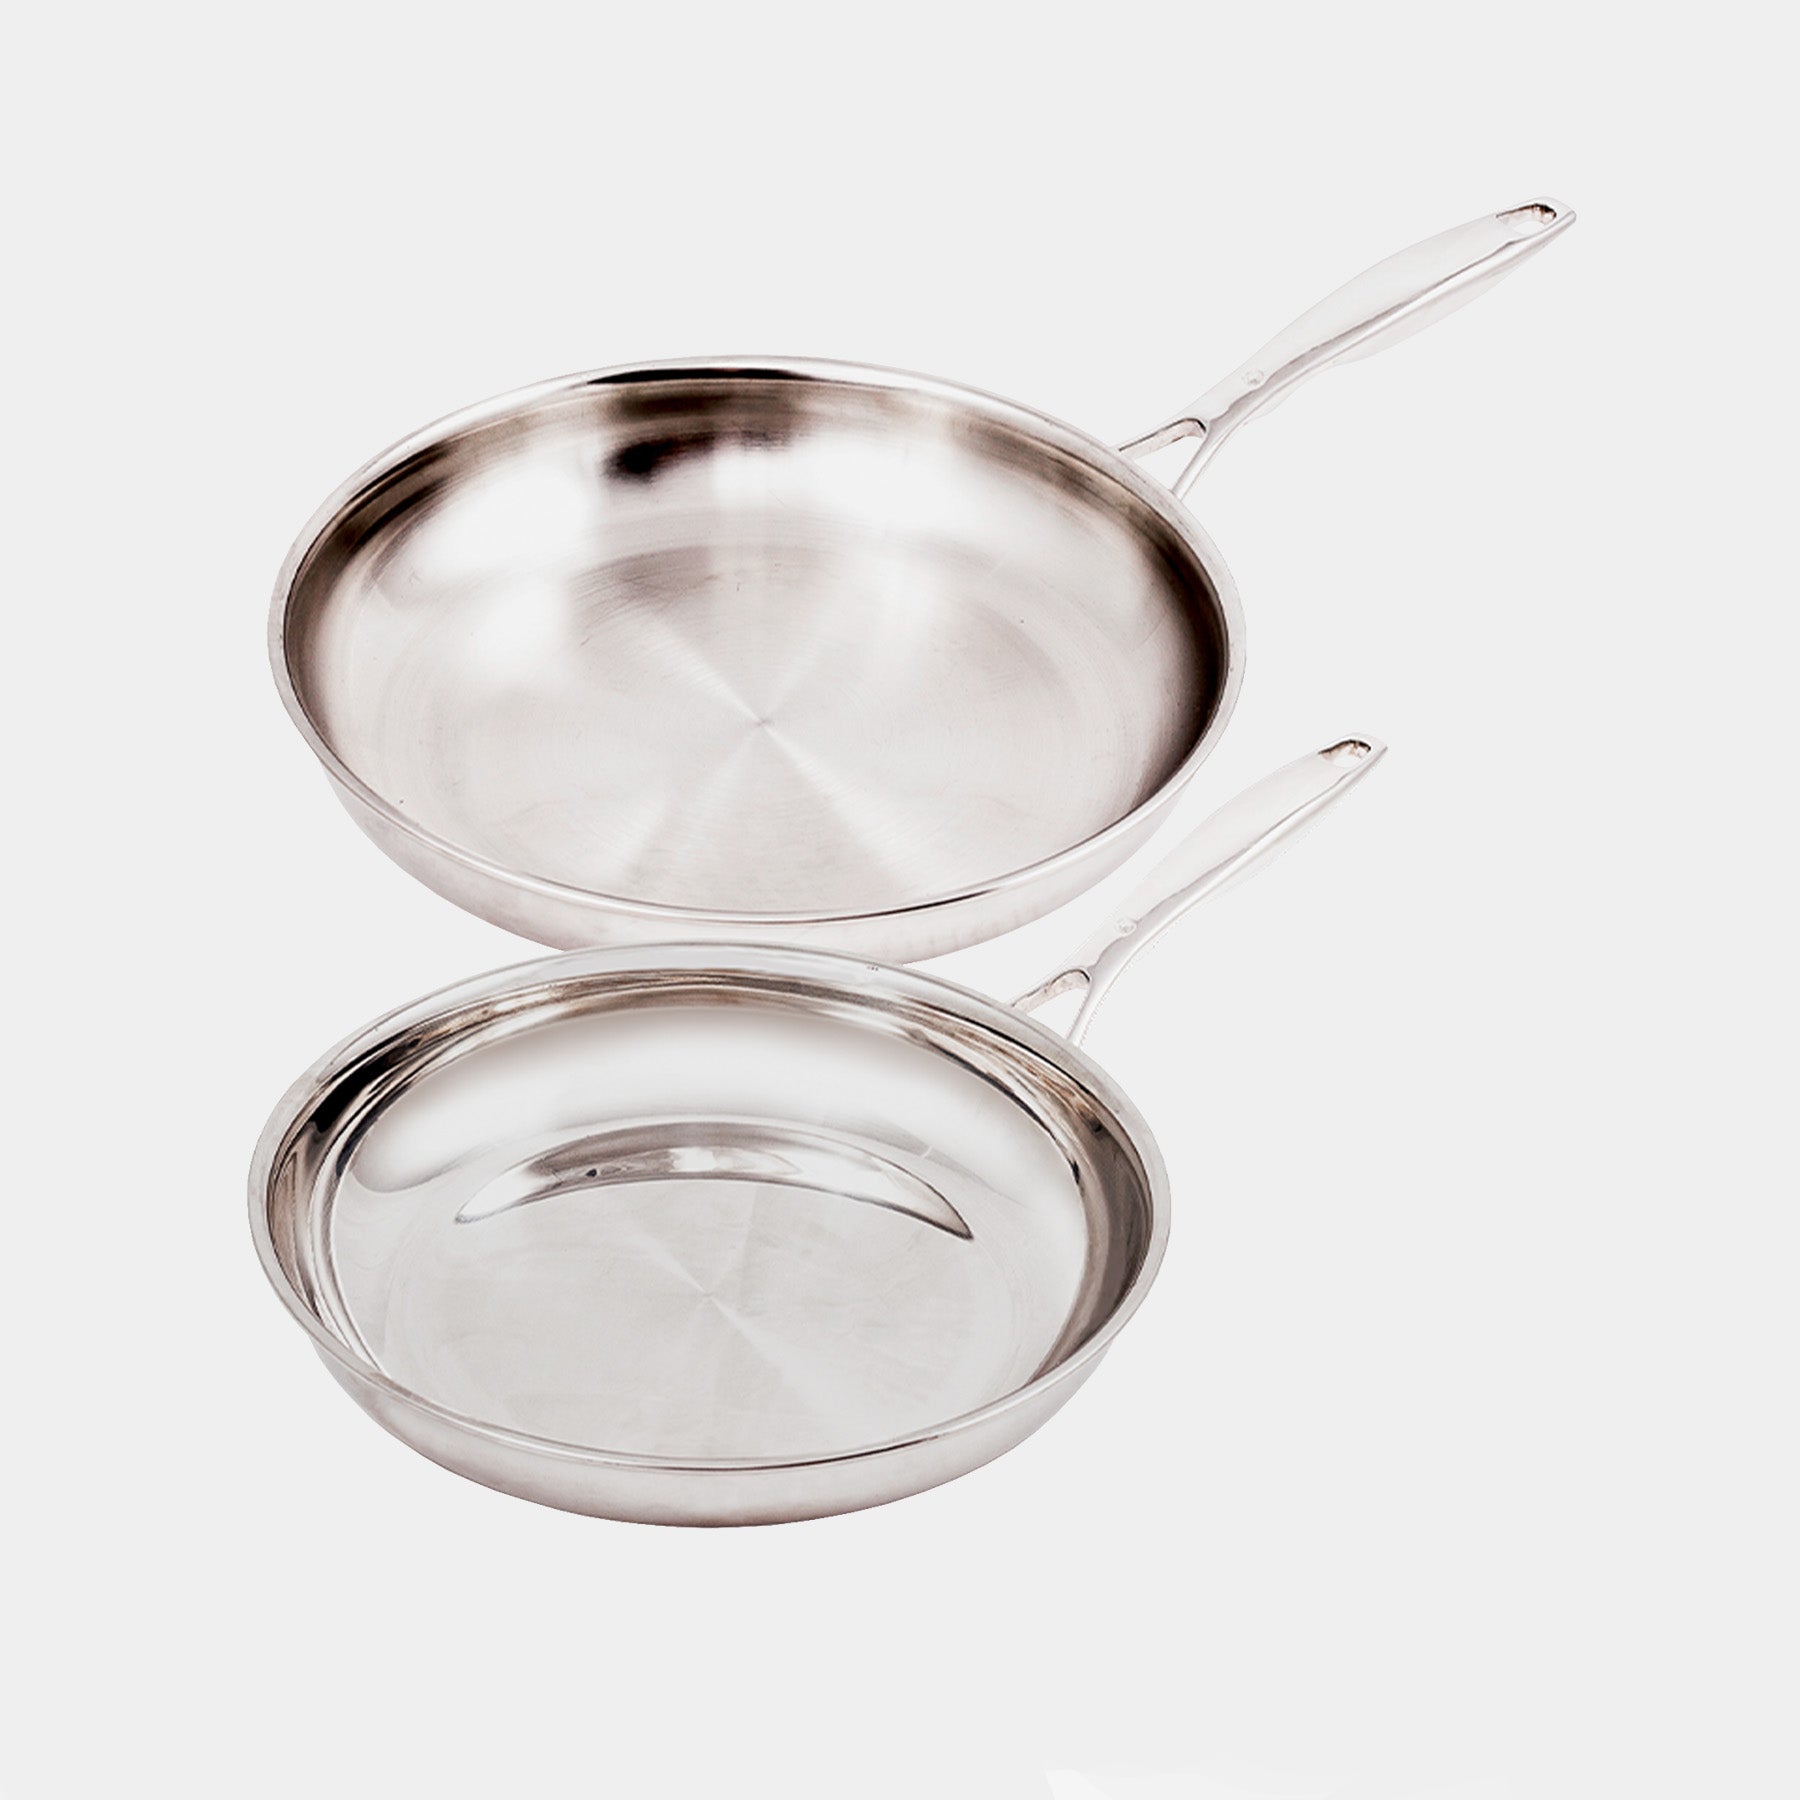 Premium Clad 2-Piece Stainless Steel Set. Includes: 9.5" Fry Pan + 11" Fry Pan.